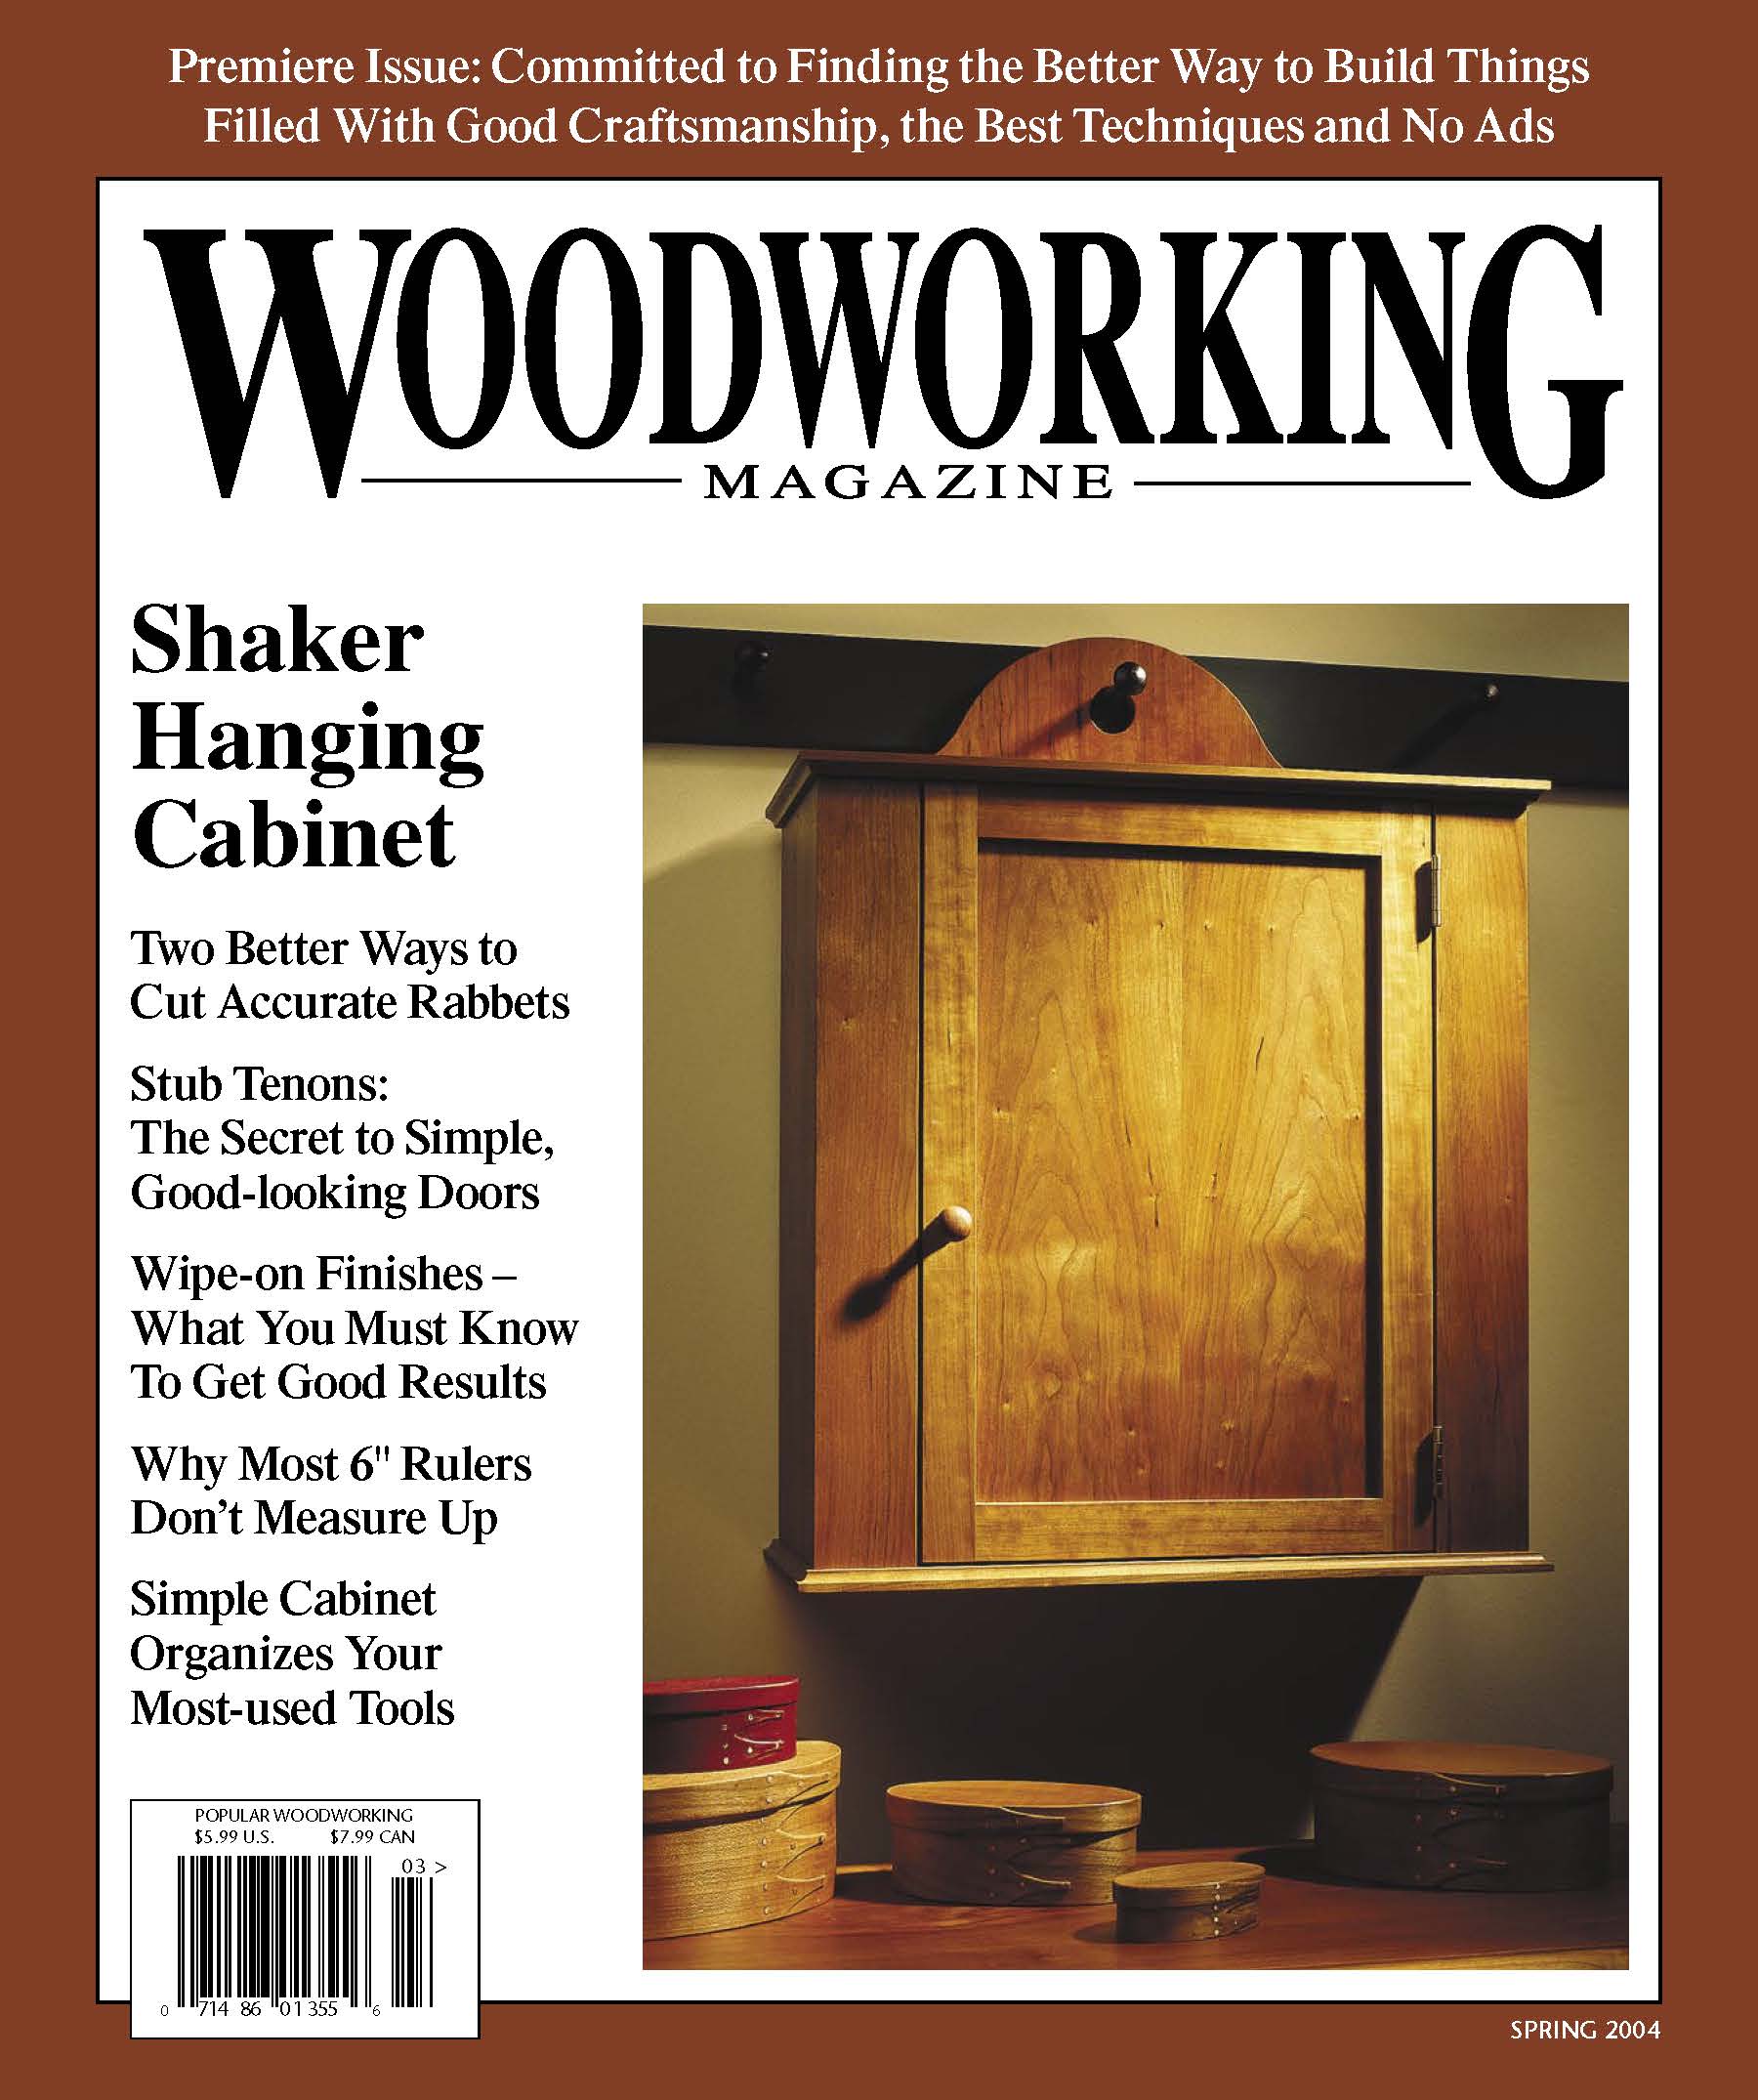 woodworking quotations, quips and more from woodworking